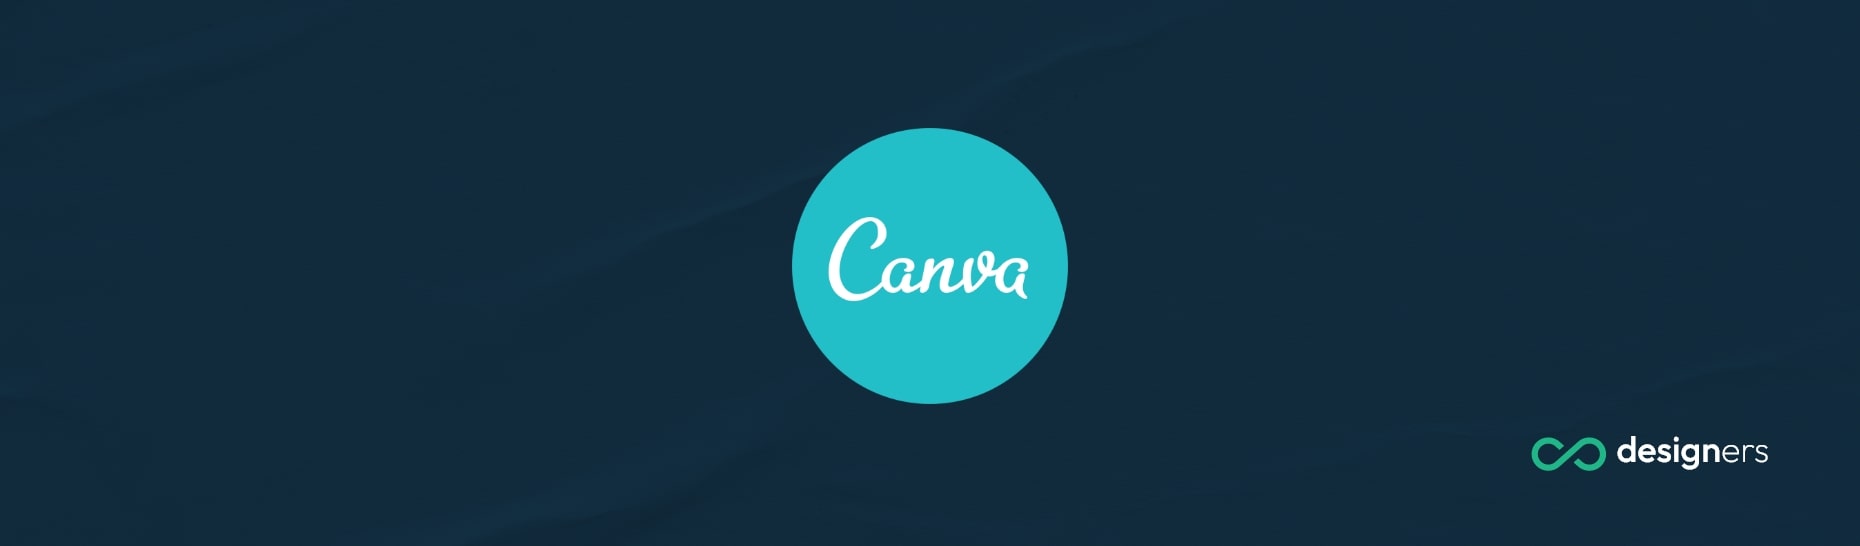 What Font Is Verdana in Canva?